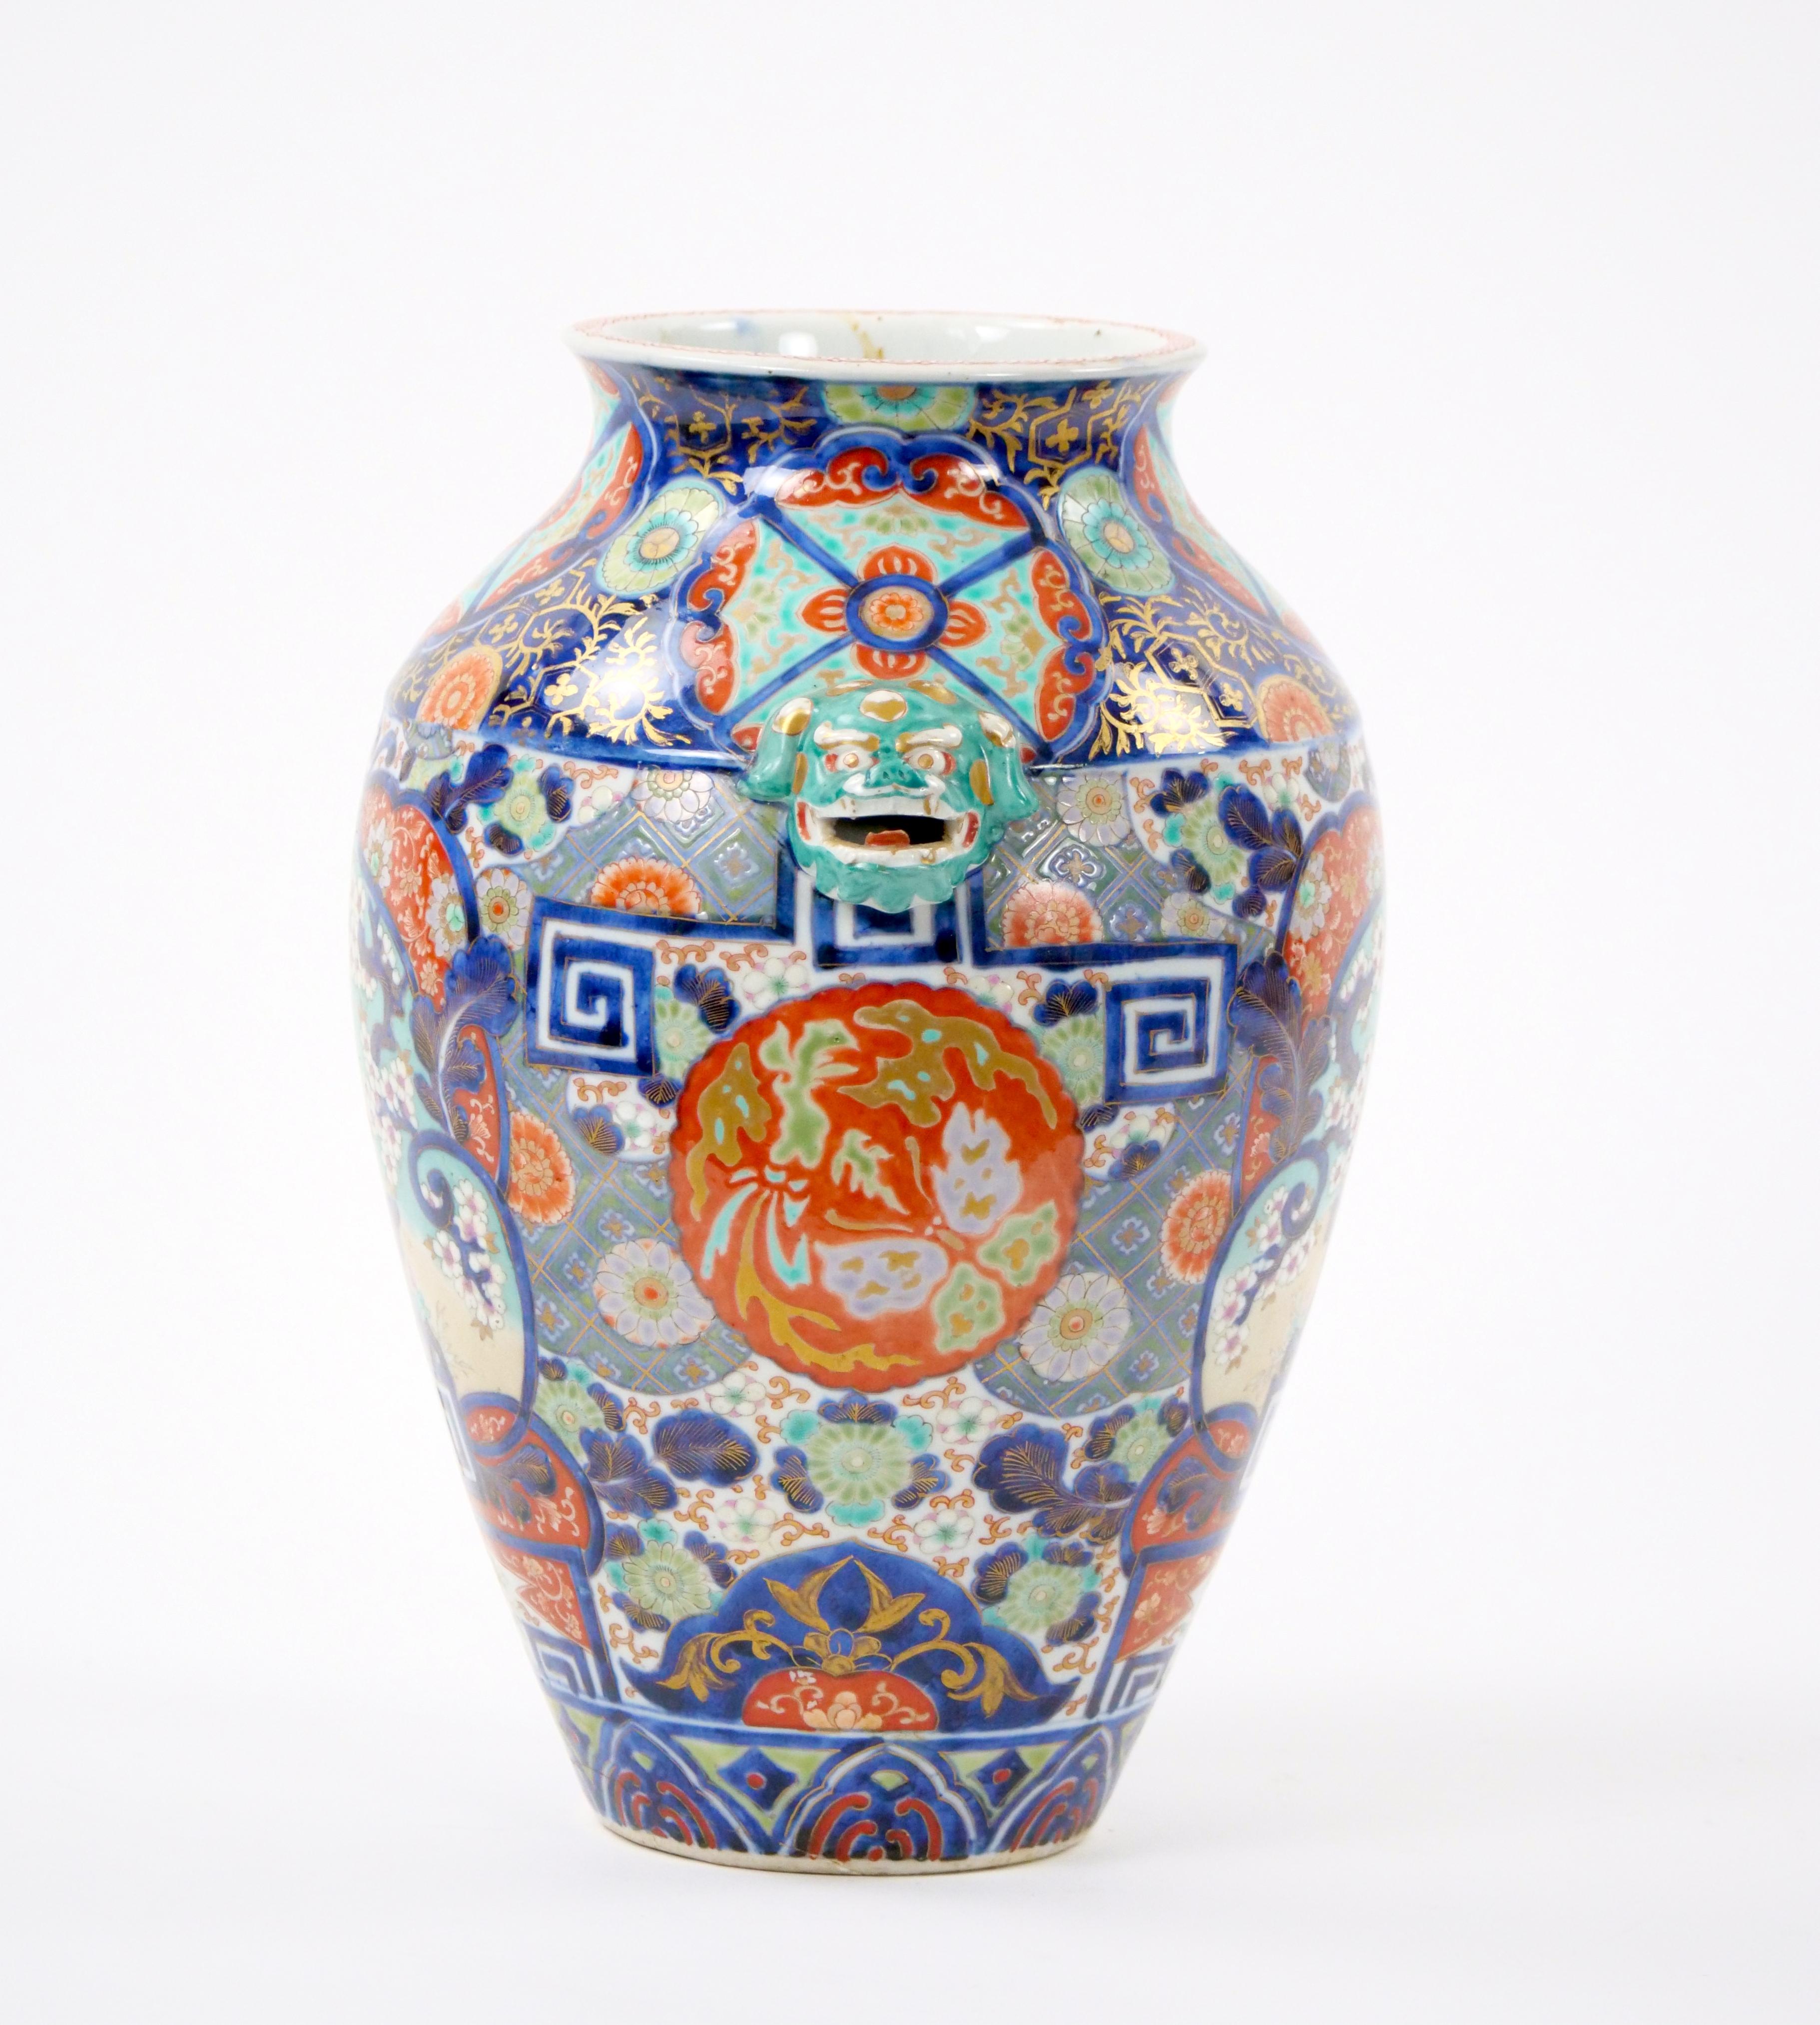 Transport yourself to the opulence of the 19th century with this exquisite Hand-Painted and Gilt Gold Decorated Imari Porcelain Vase, featuring a captivating foo dog side handle. Meticulously crafted, this vase is a testament to the artistry and